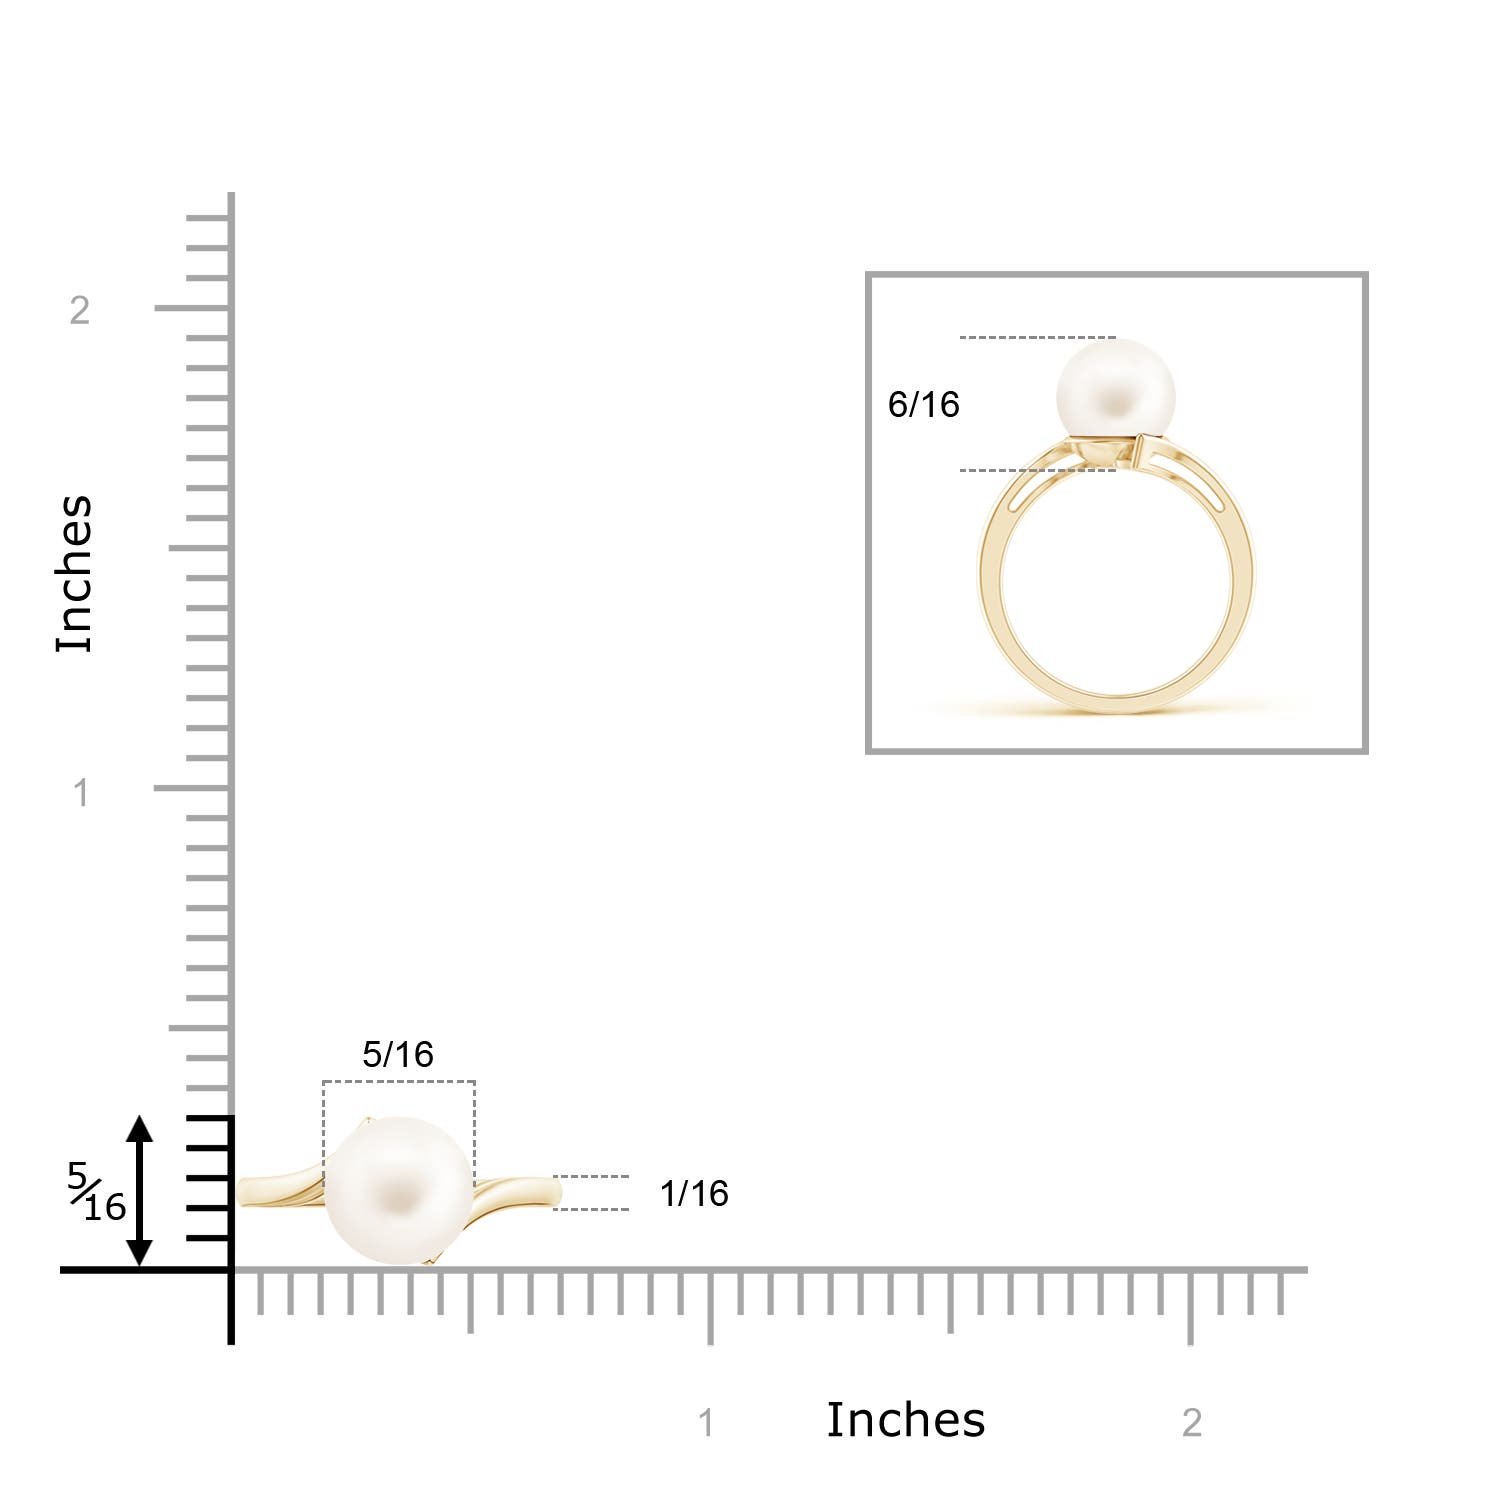 AA / 3.7 CT / 14 KT Yellow Gold